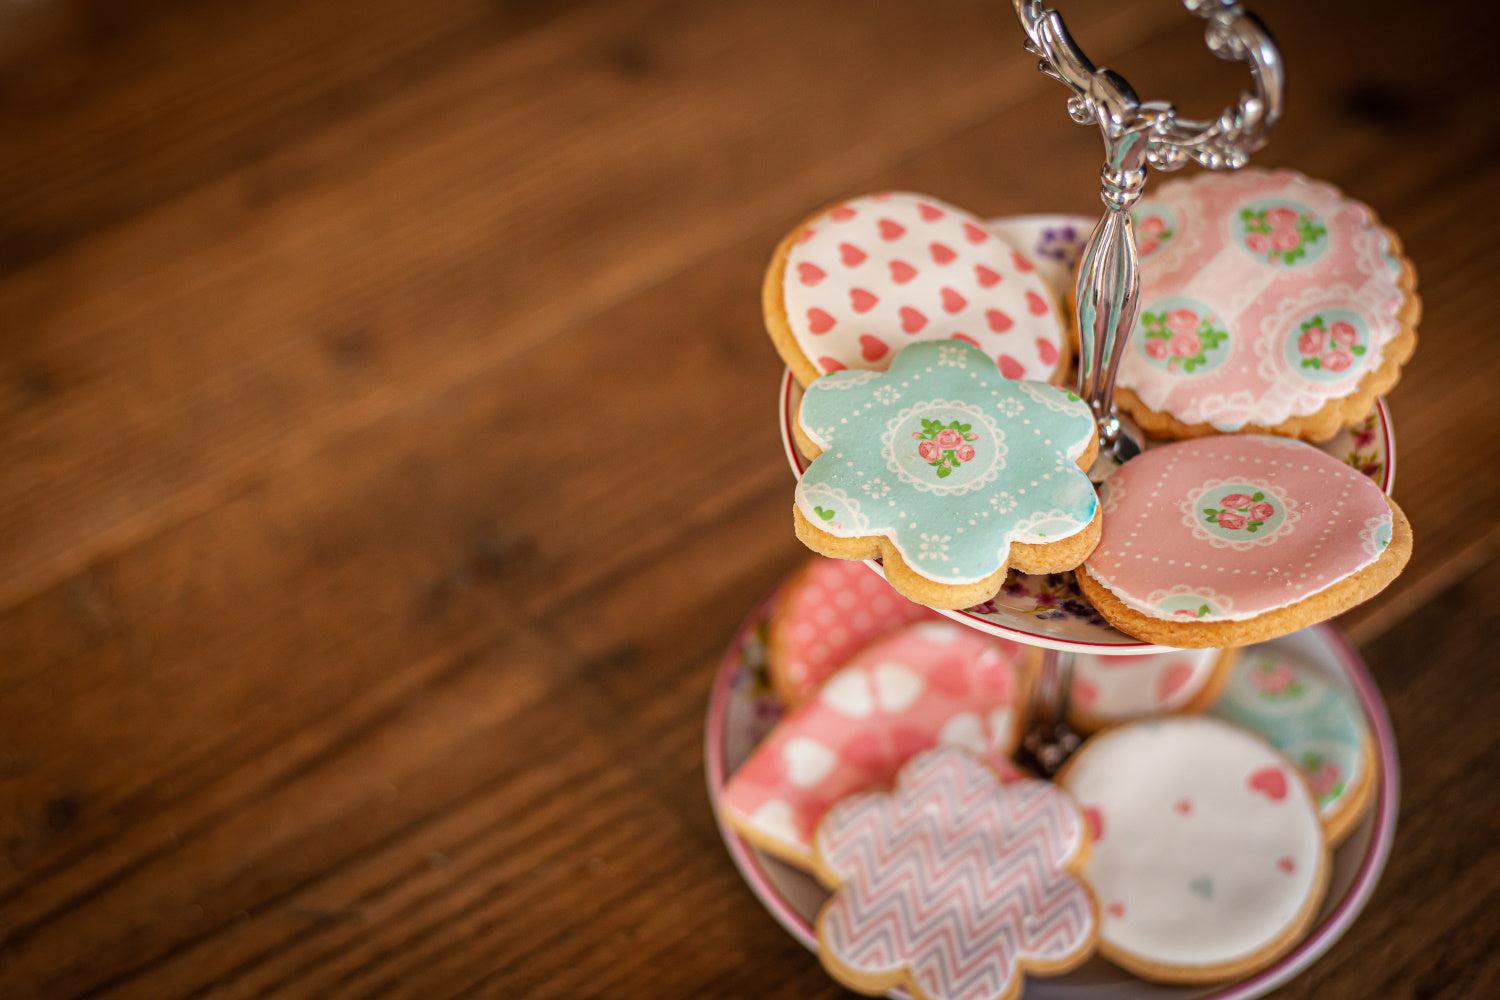 Sugar Cookies decorated with printed icing